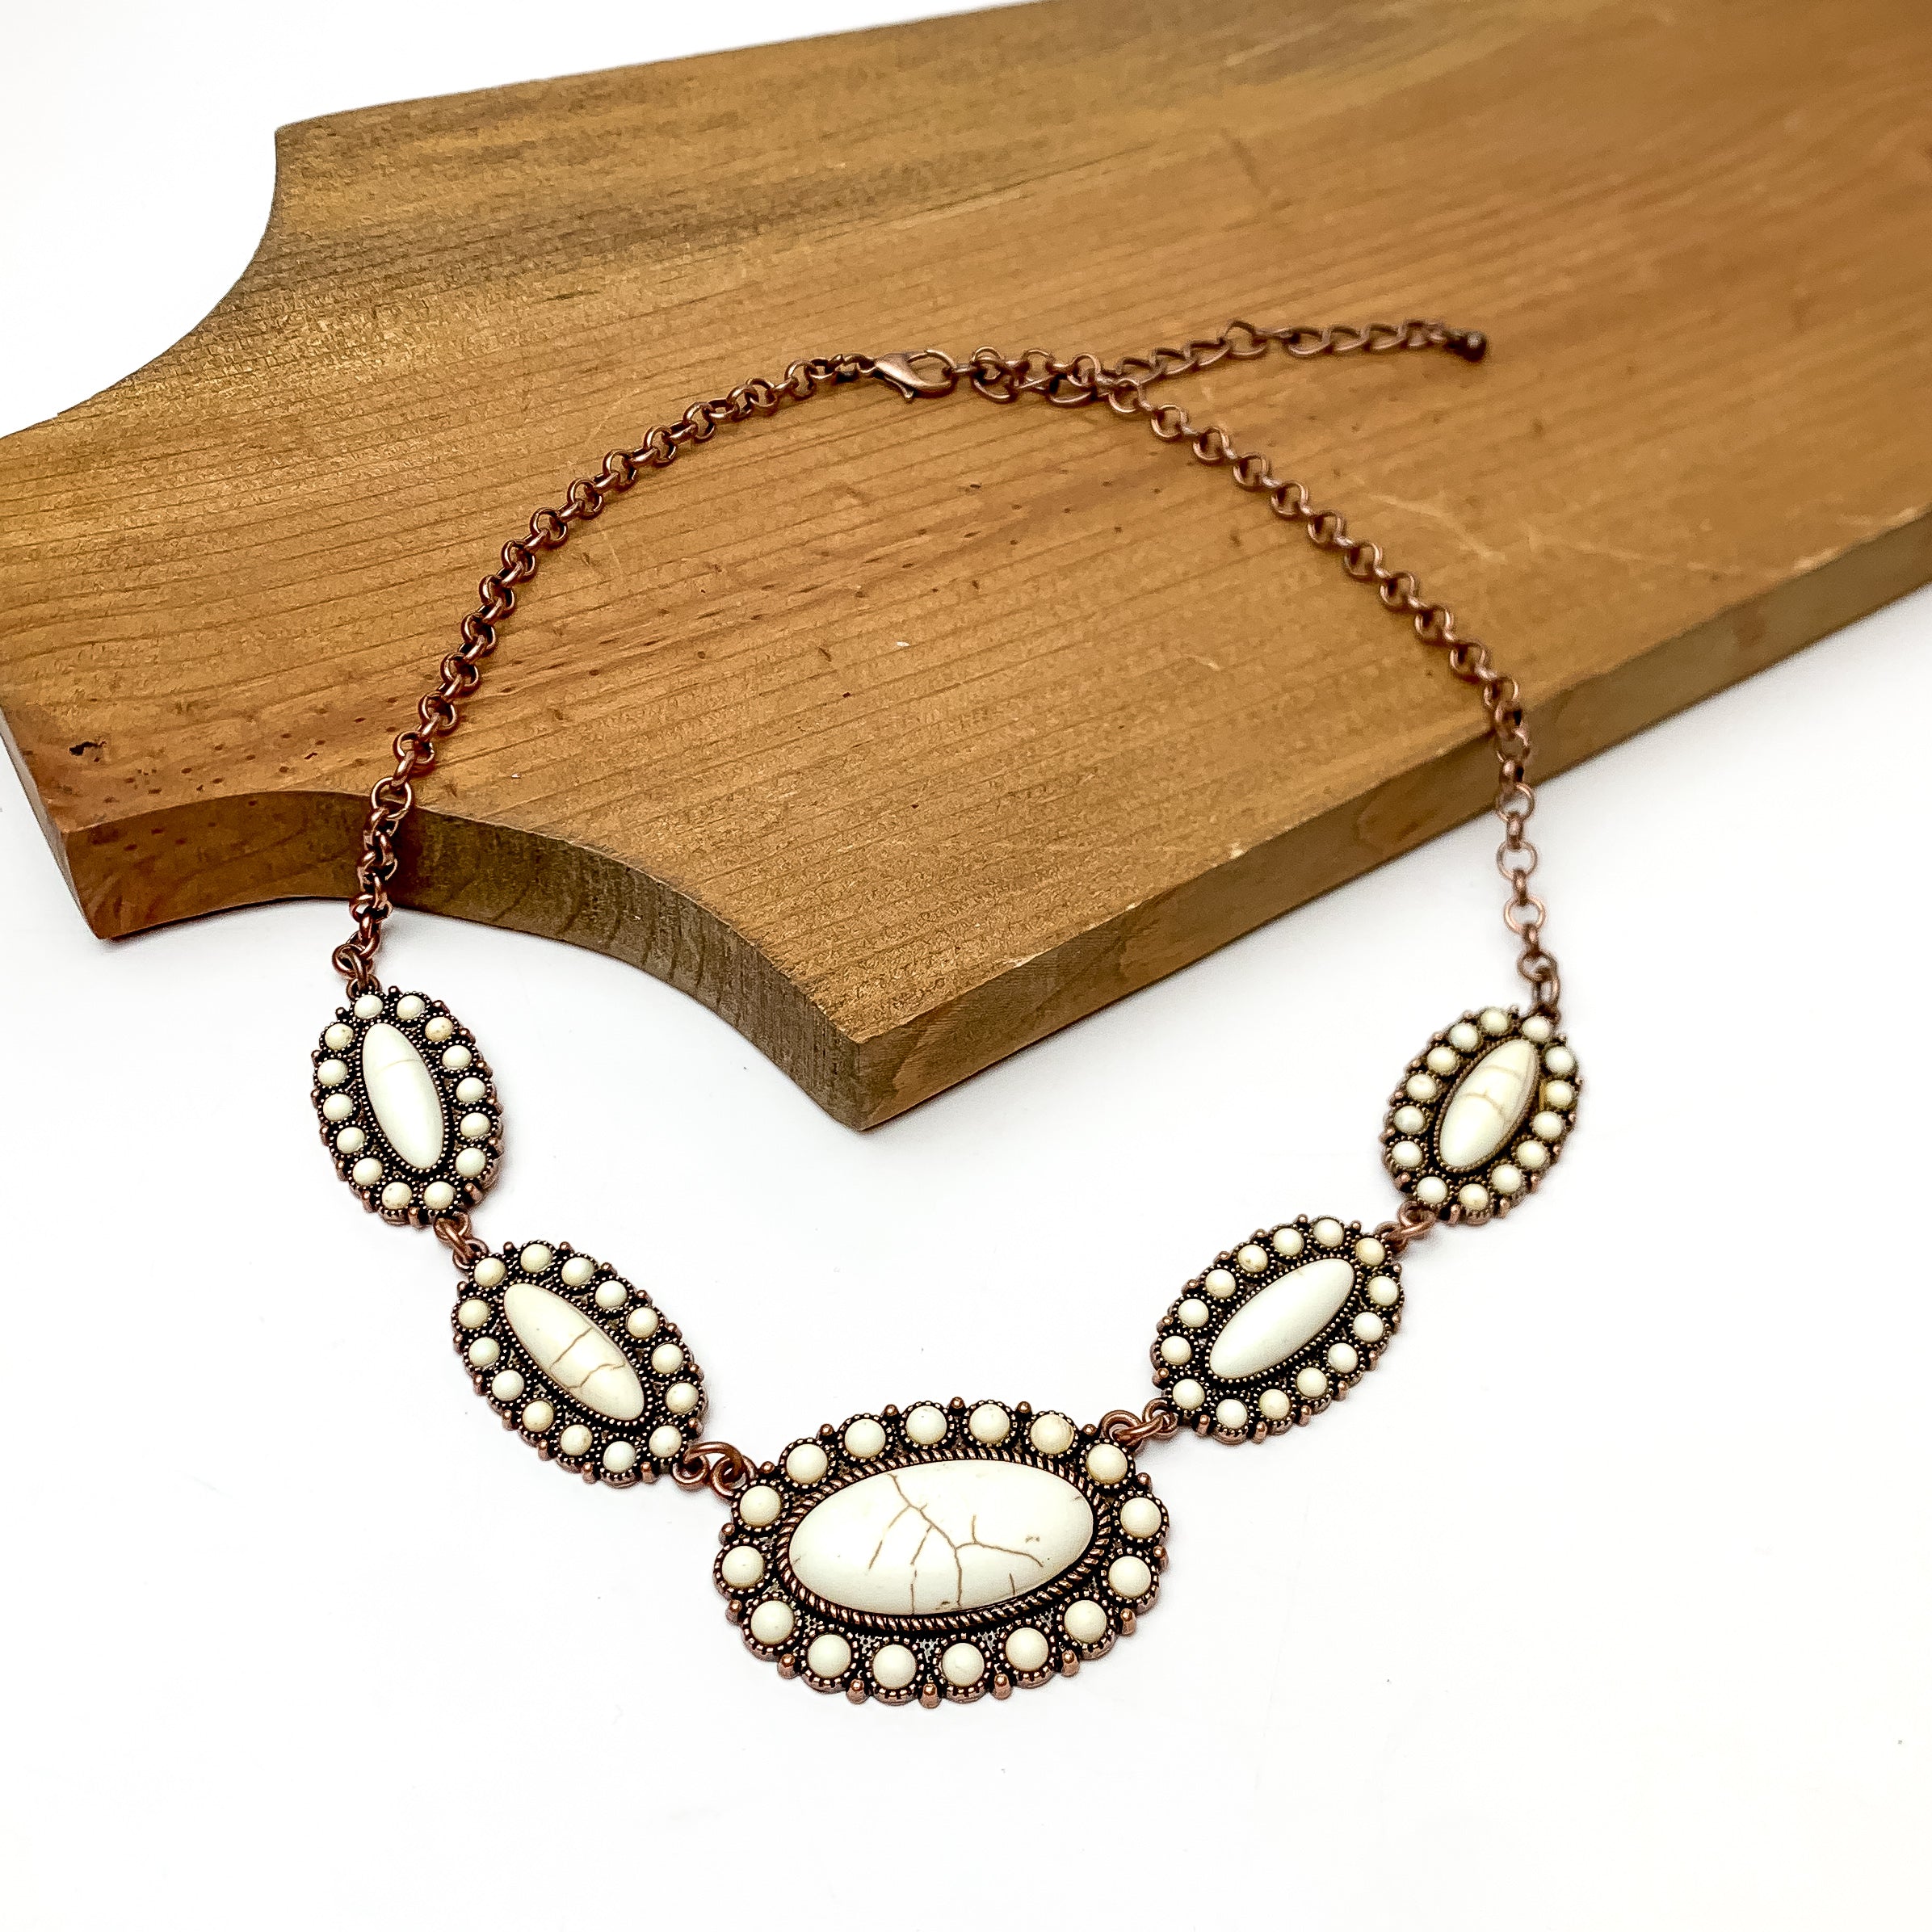 Western Copper Tone Necklace in Ivory. This necklace is pictured paying on a wood piece with a white background.